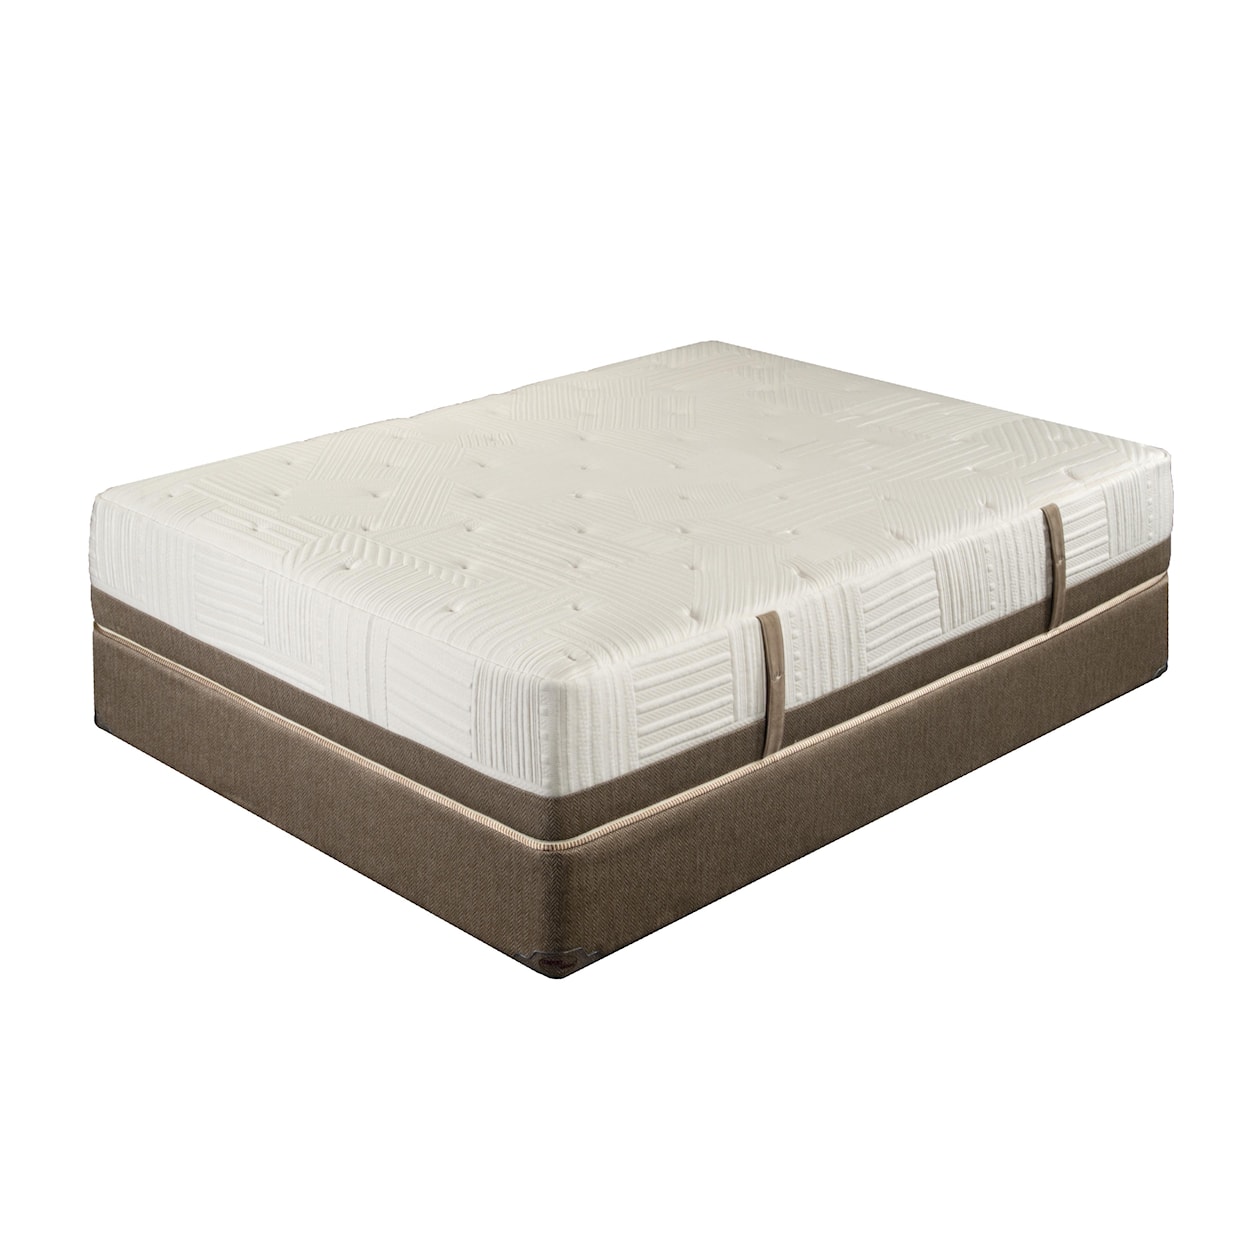 King Koil Extended Life 3000 Twin Firm Mattress